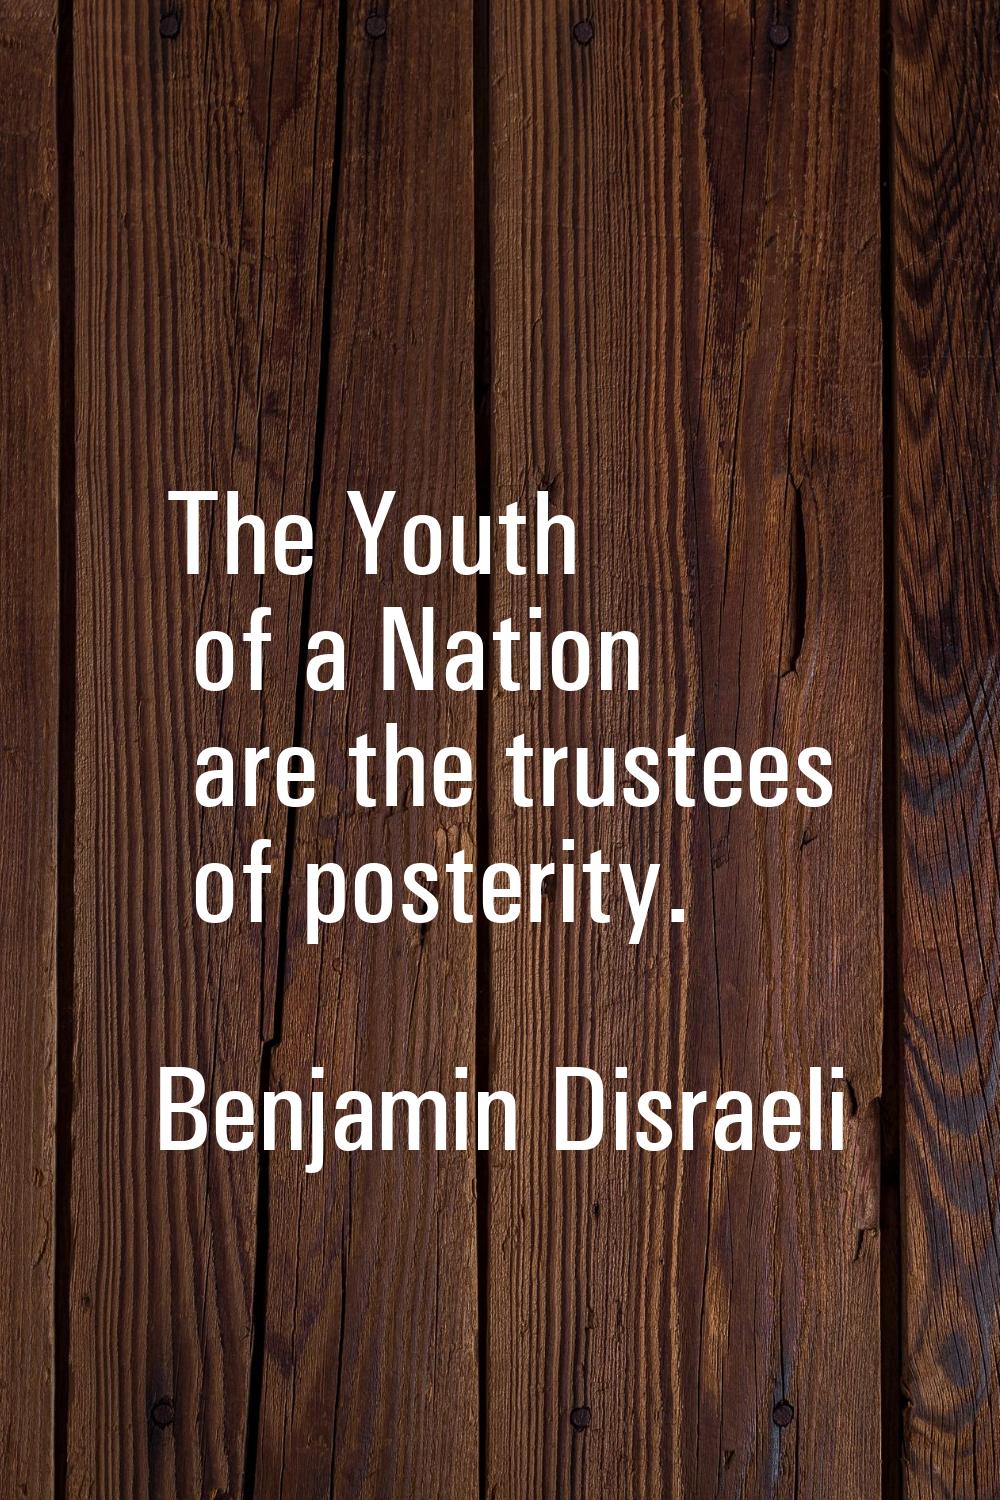 The Youth of a Nation are the trustees of posterity.